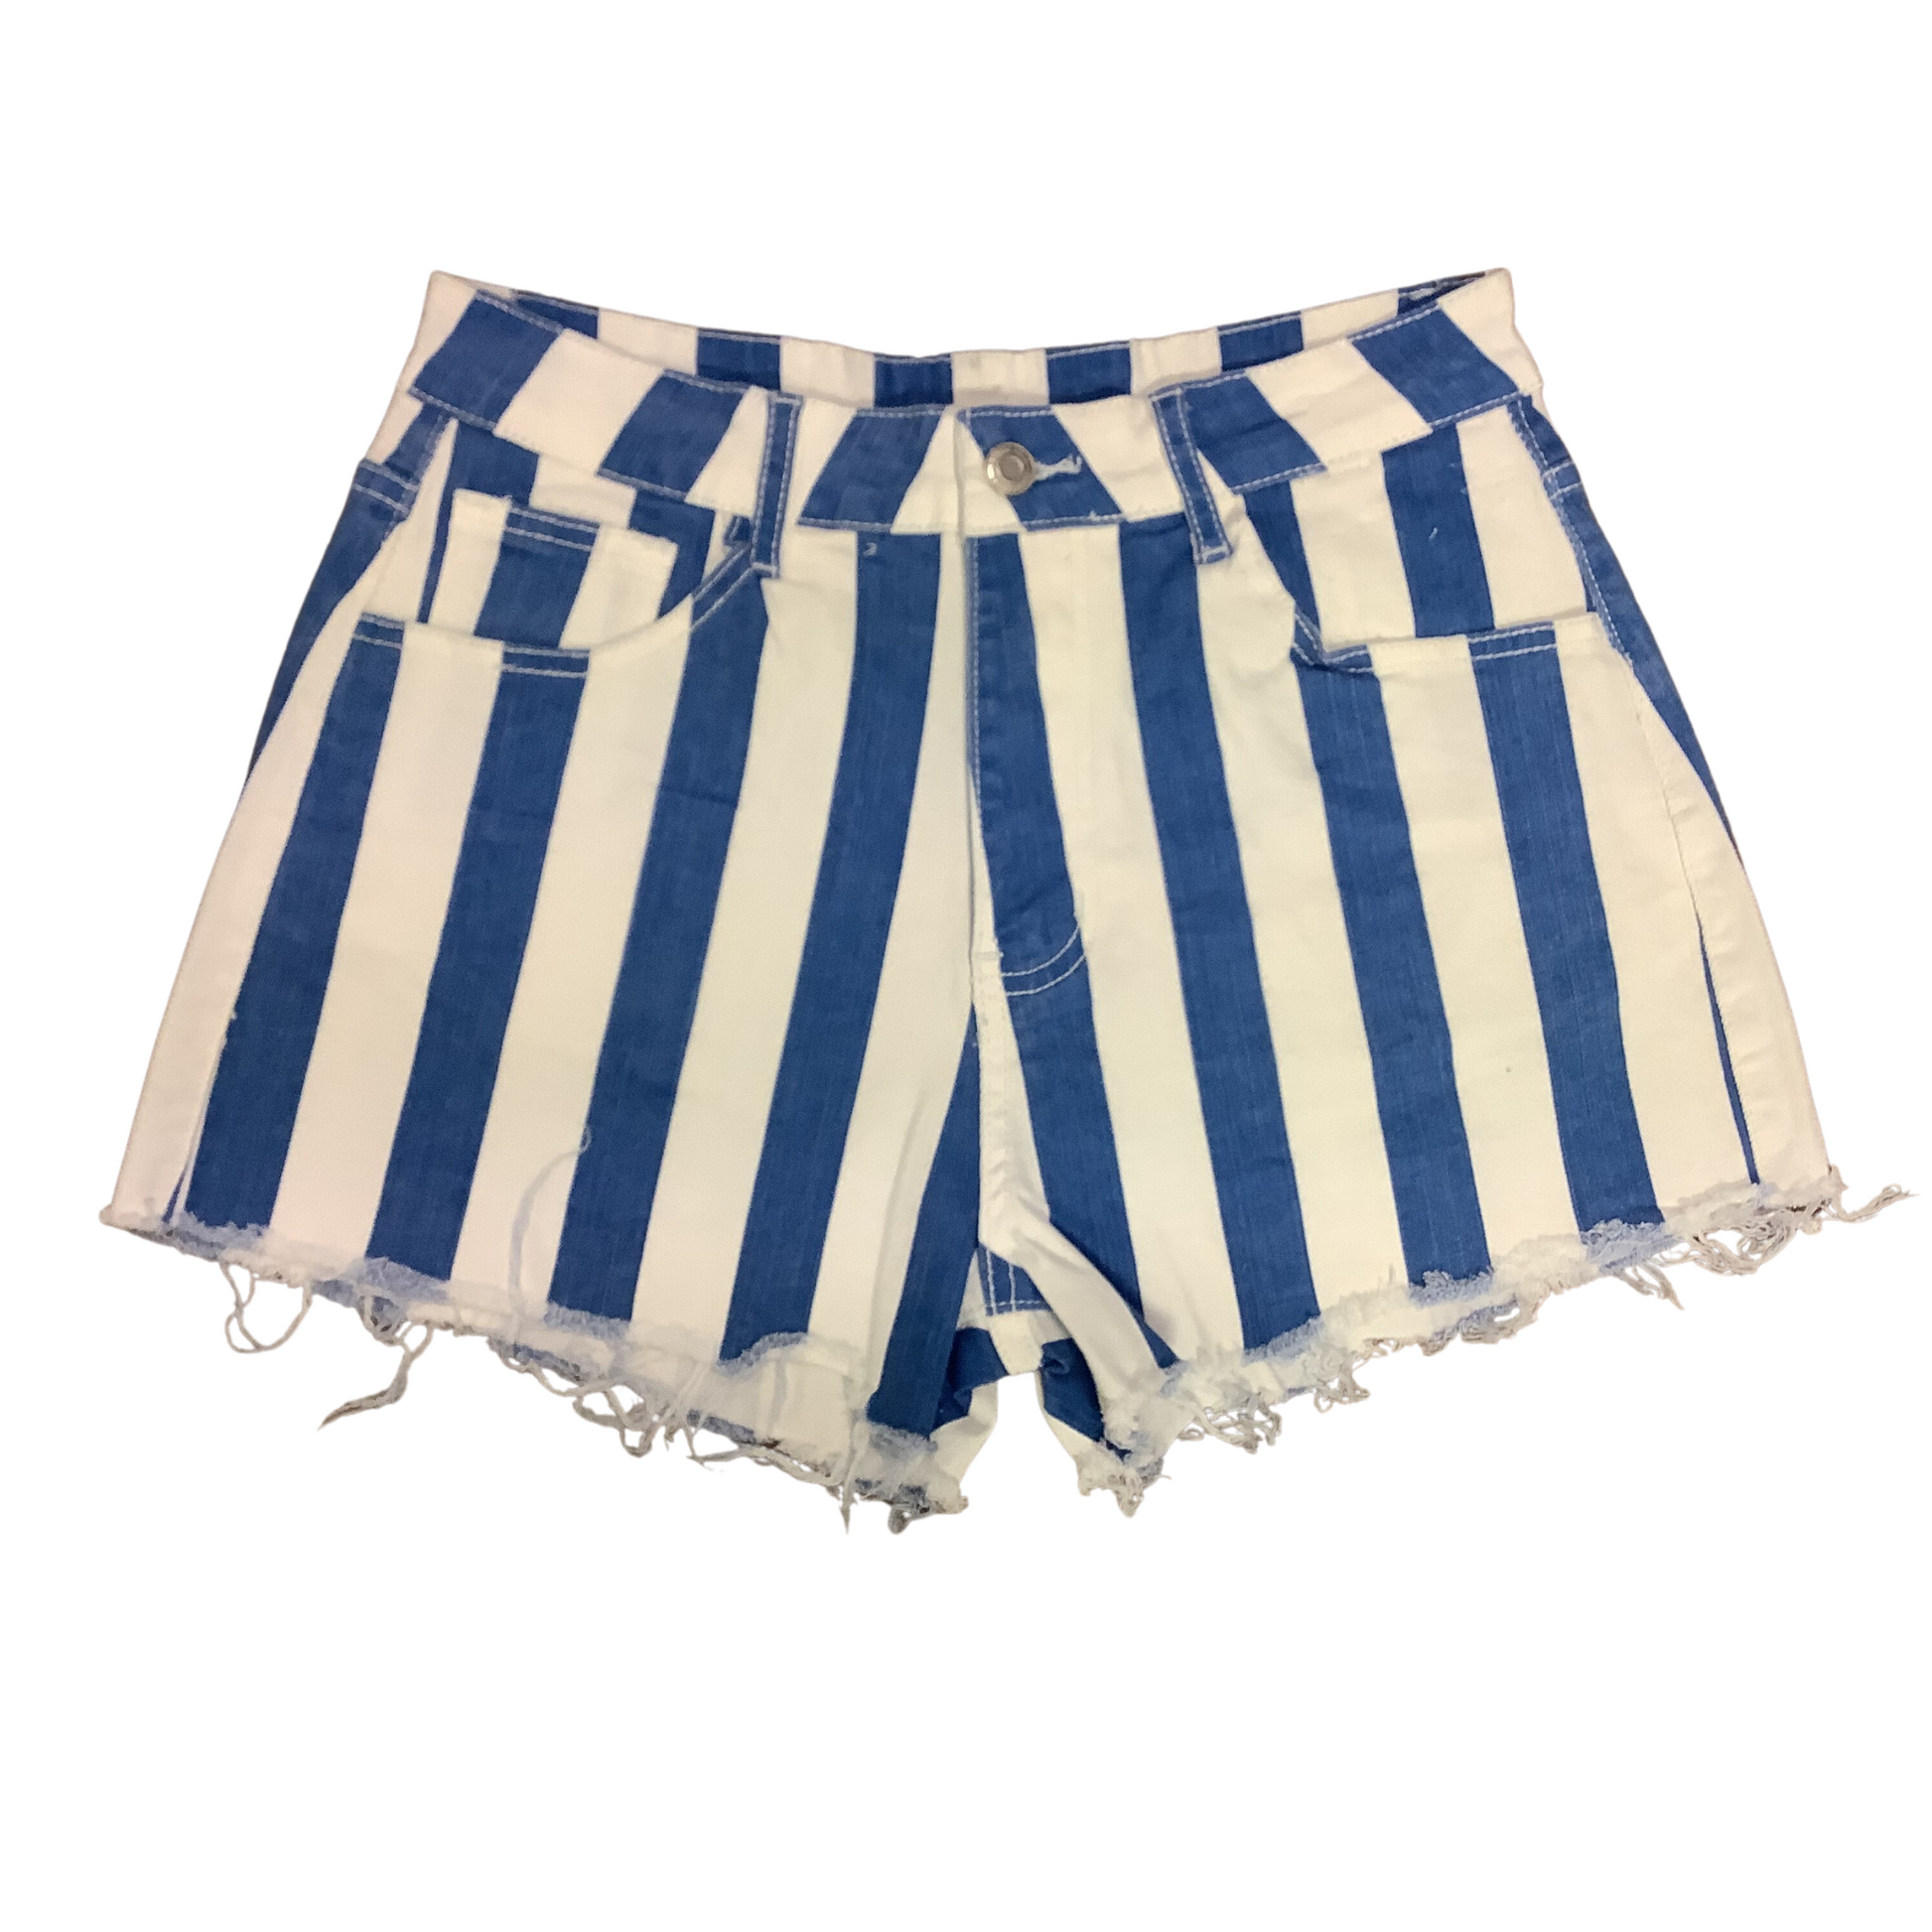 Look stylish while staying comfortable with our Wide Striped Raw Hem Shorts. Crafted from durable denim, these shorts feature a classic blue and white stripe and a raw hem for an on-trend look. Perfect for any summer occasion.